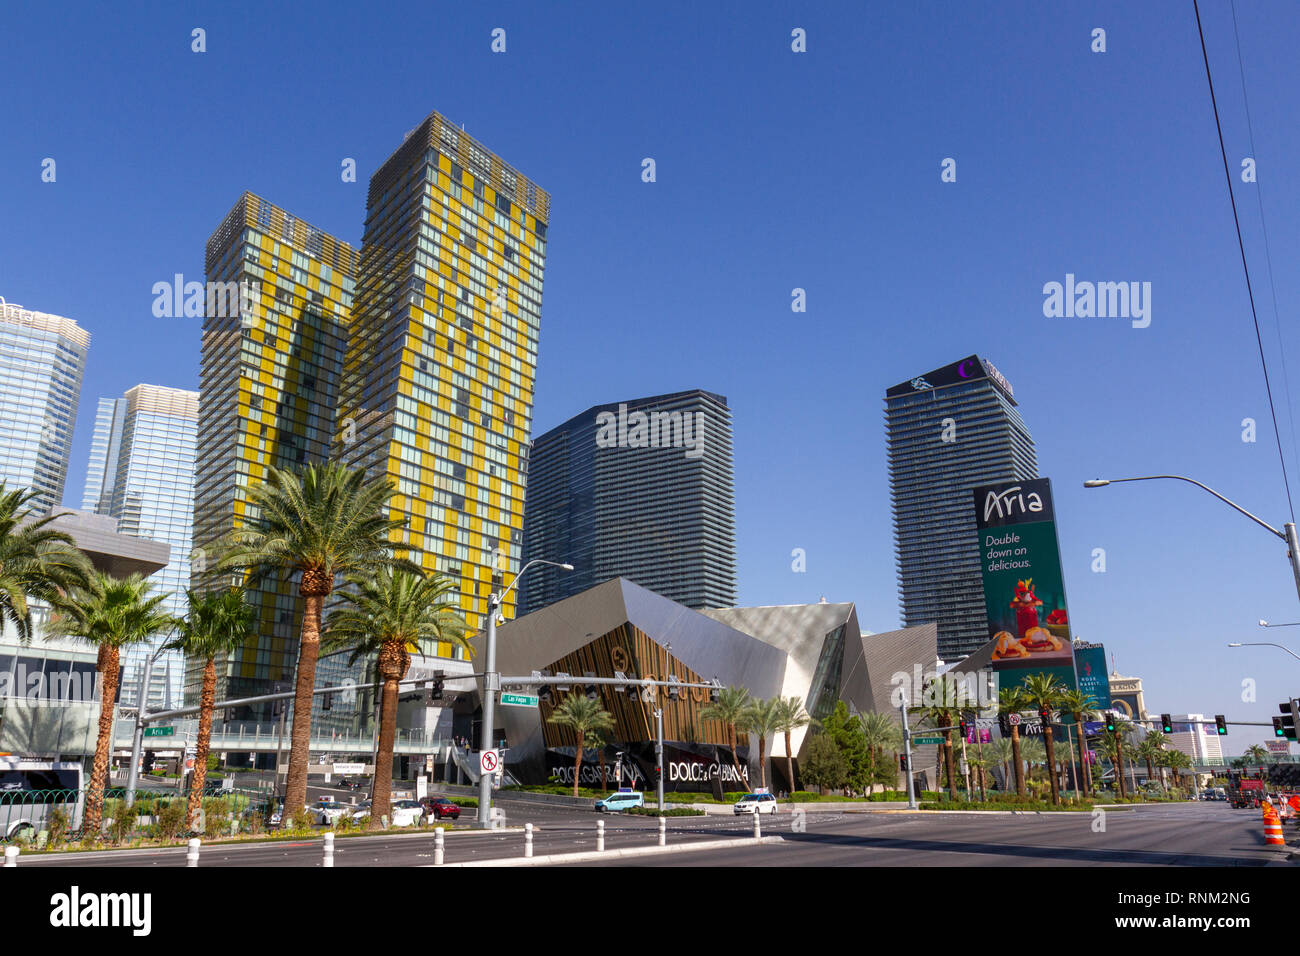 Skyline view of (L-R) the Aria hotel, Veer Towers residences, Dolce & Gabana store, and the Cosmopolitan, Las Vegas, Nevada, United States. Stock Photo